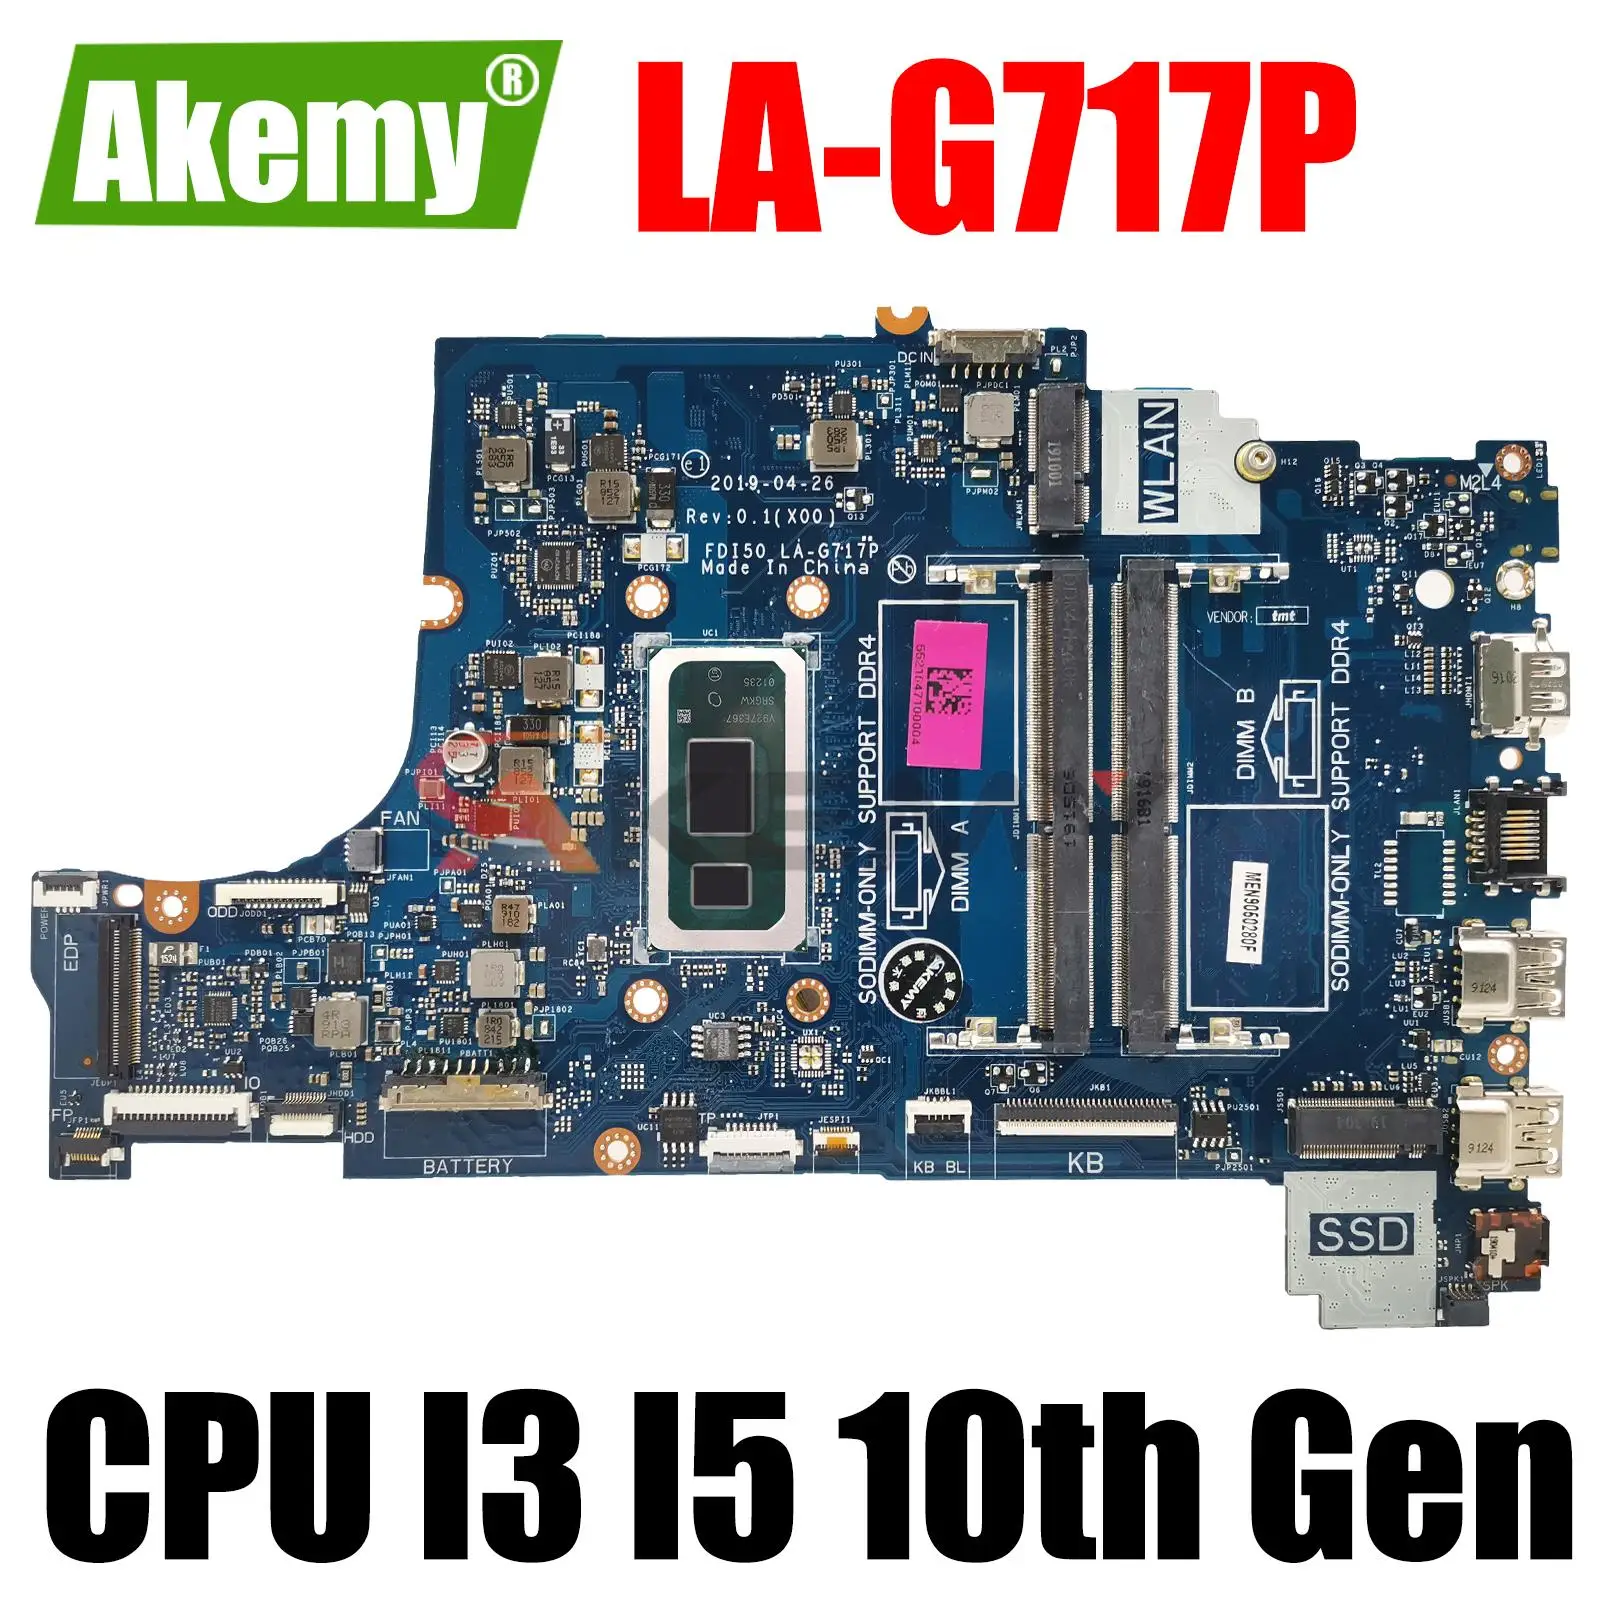 

LA-G717P i3 i5 i7 CPU For Dell Inspiron 3490 3590 3790 5494 5594 Laptop Motherboard M6F40 PV4FF 0CPVR Mainboard 100% Tested ok